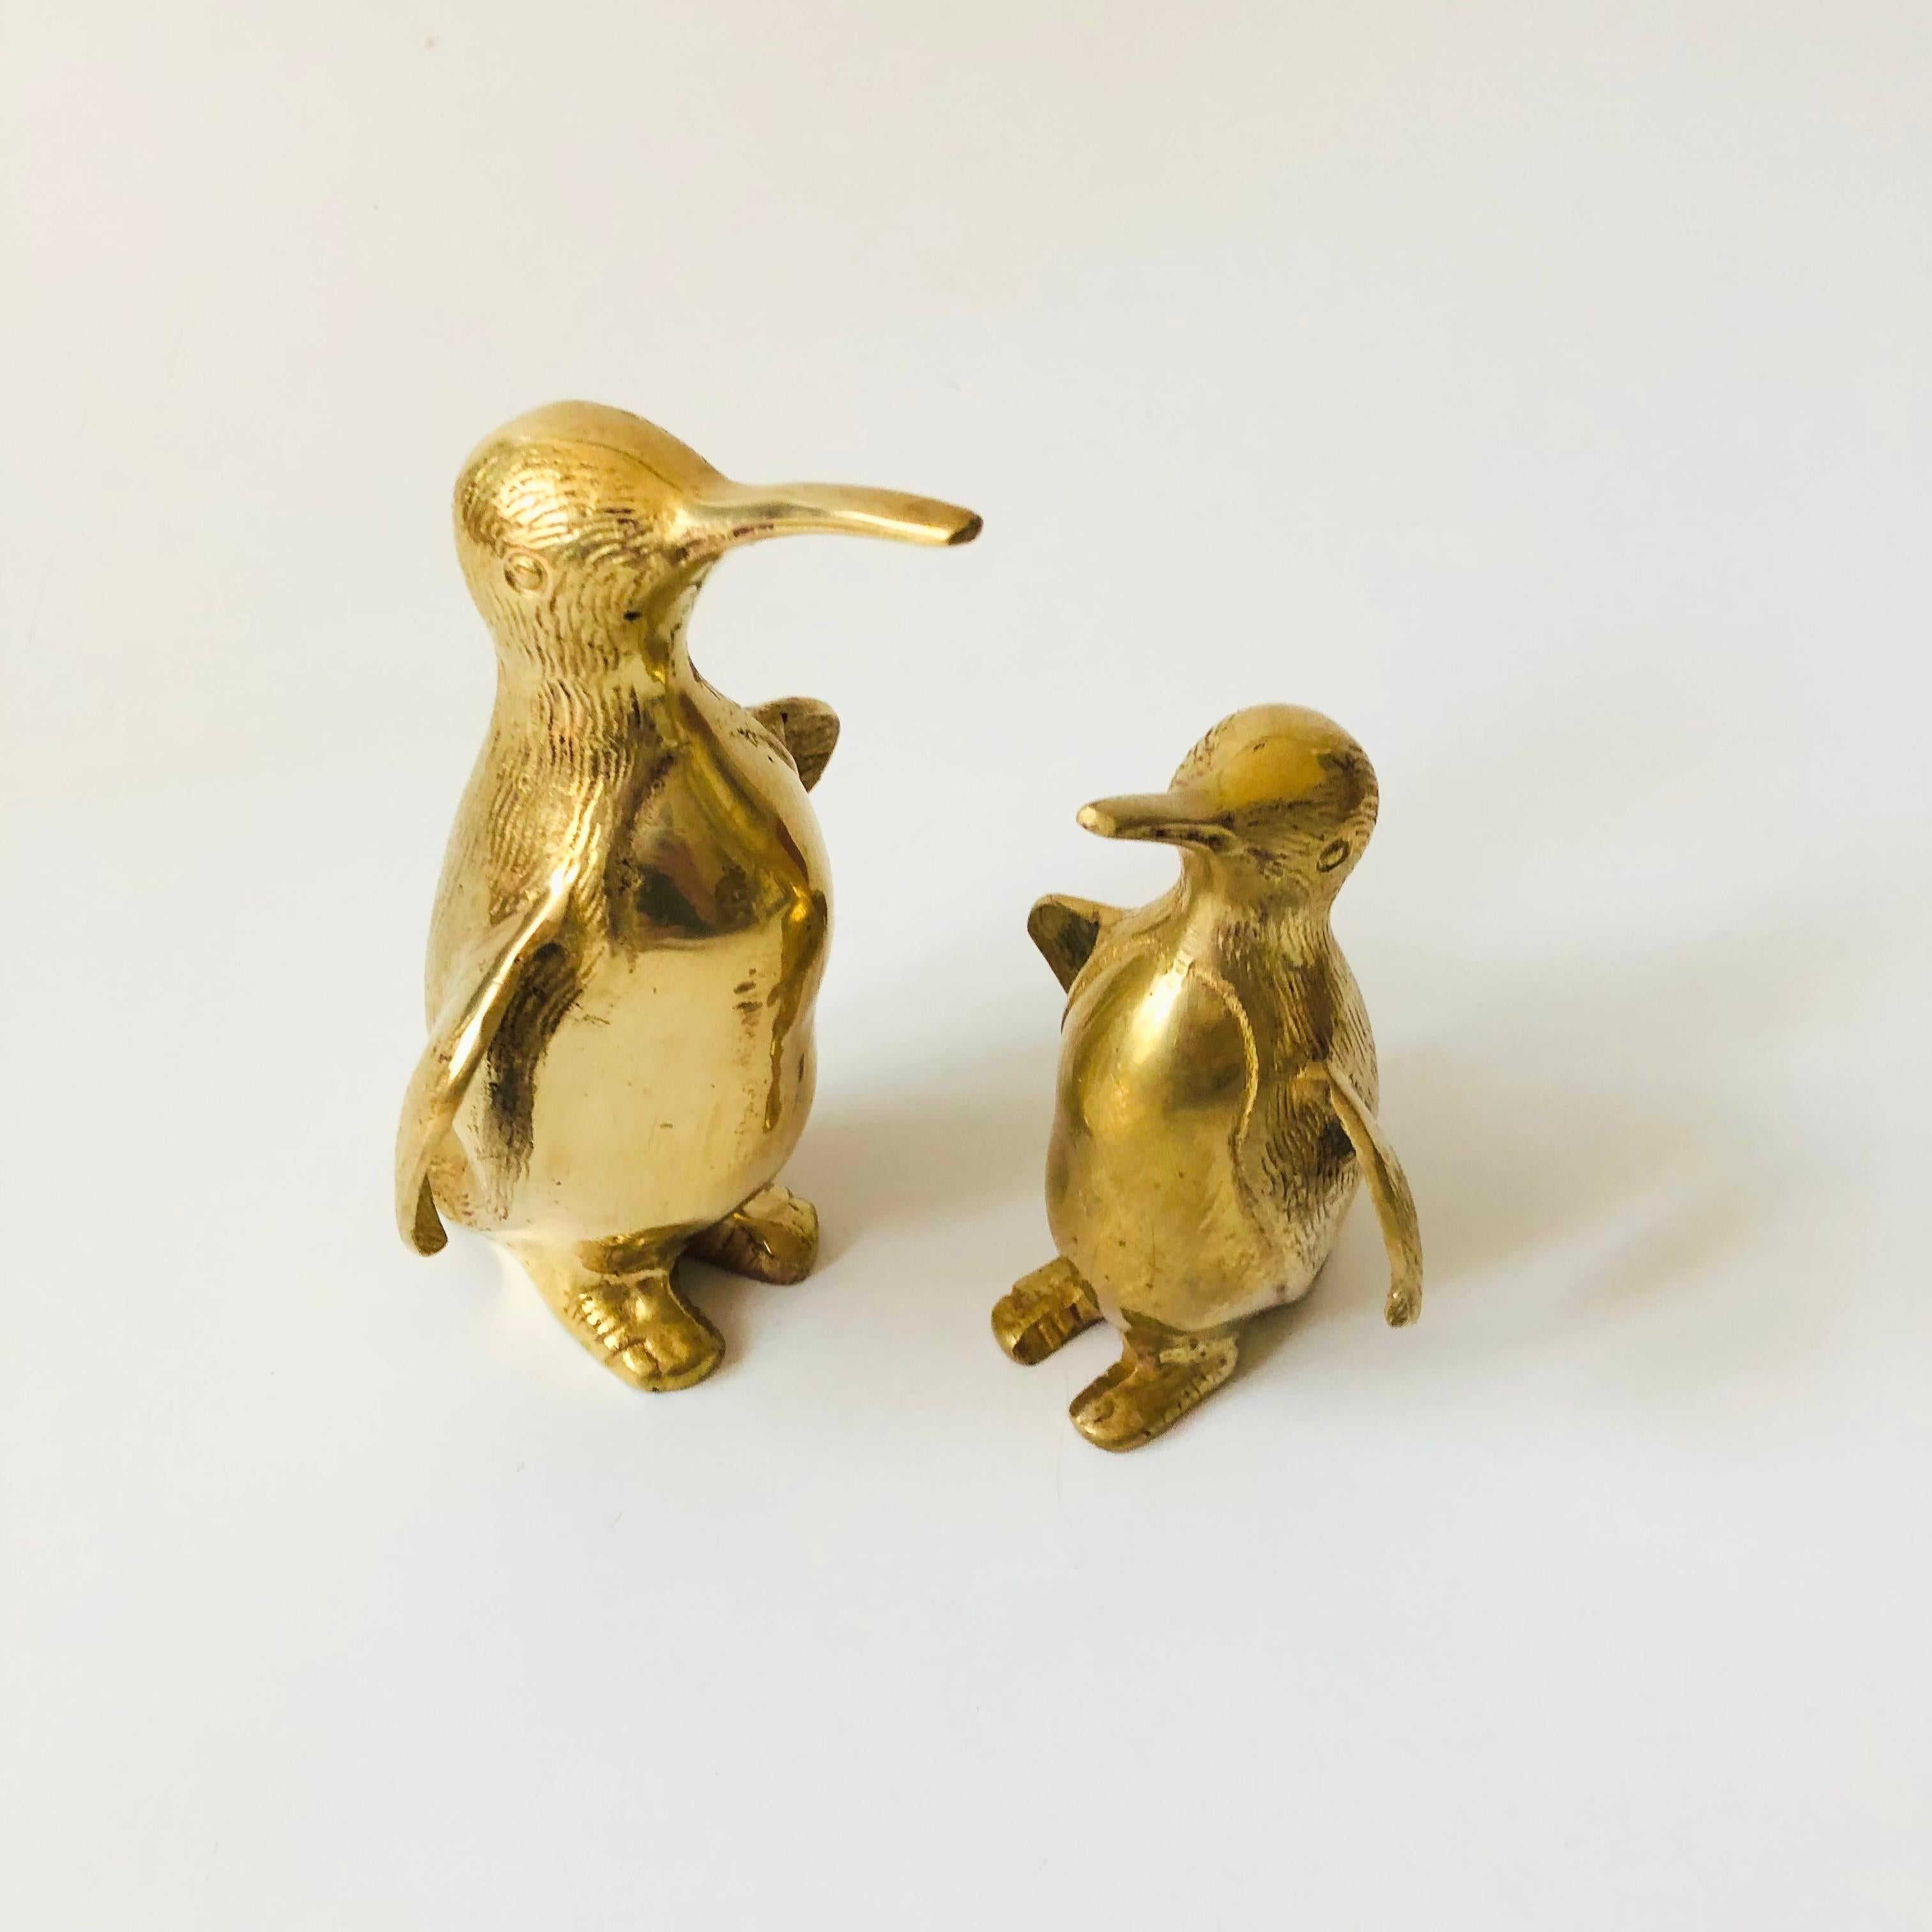 A pair of vintage brass penguins in 2 sizes. High shine to the brass and detailing throughout. Made in Korea.
Measurements:
4